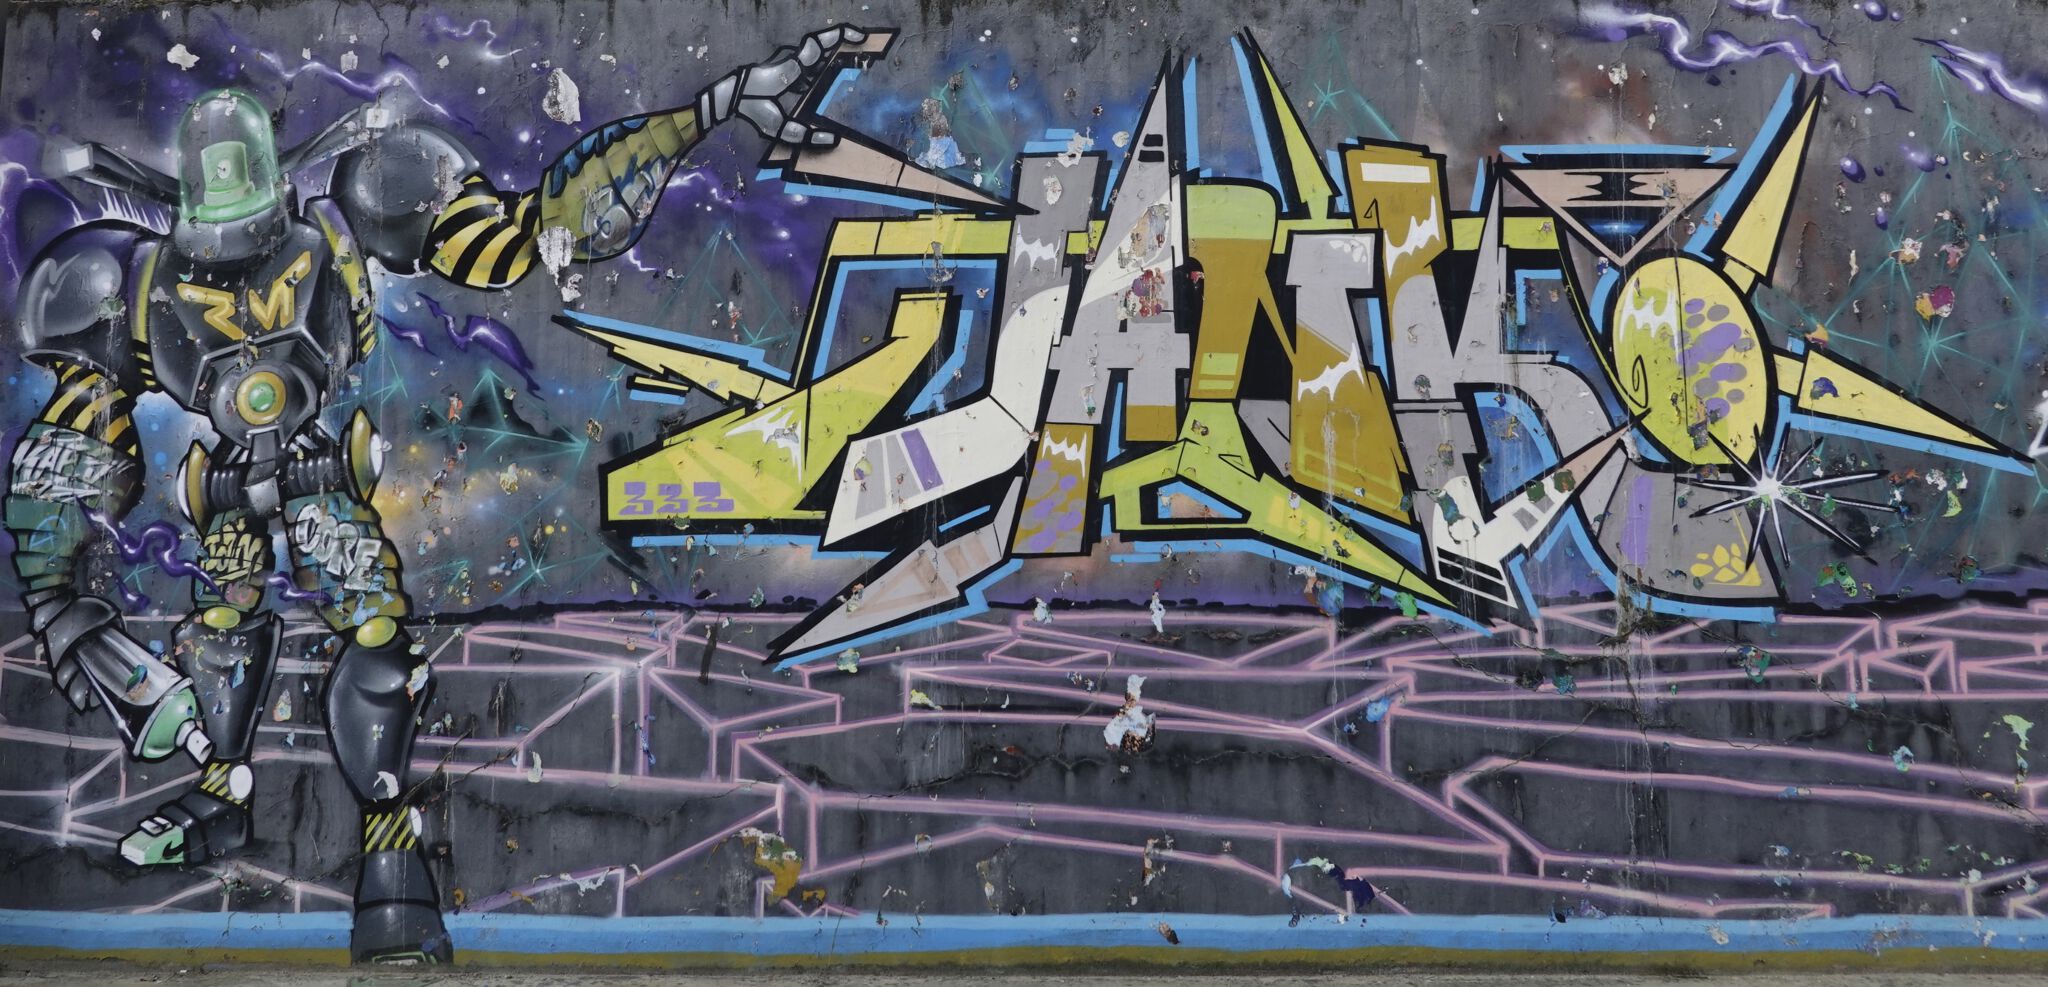 Jay Kaes, Rm crew&mdash;Not known - Desconocido 